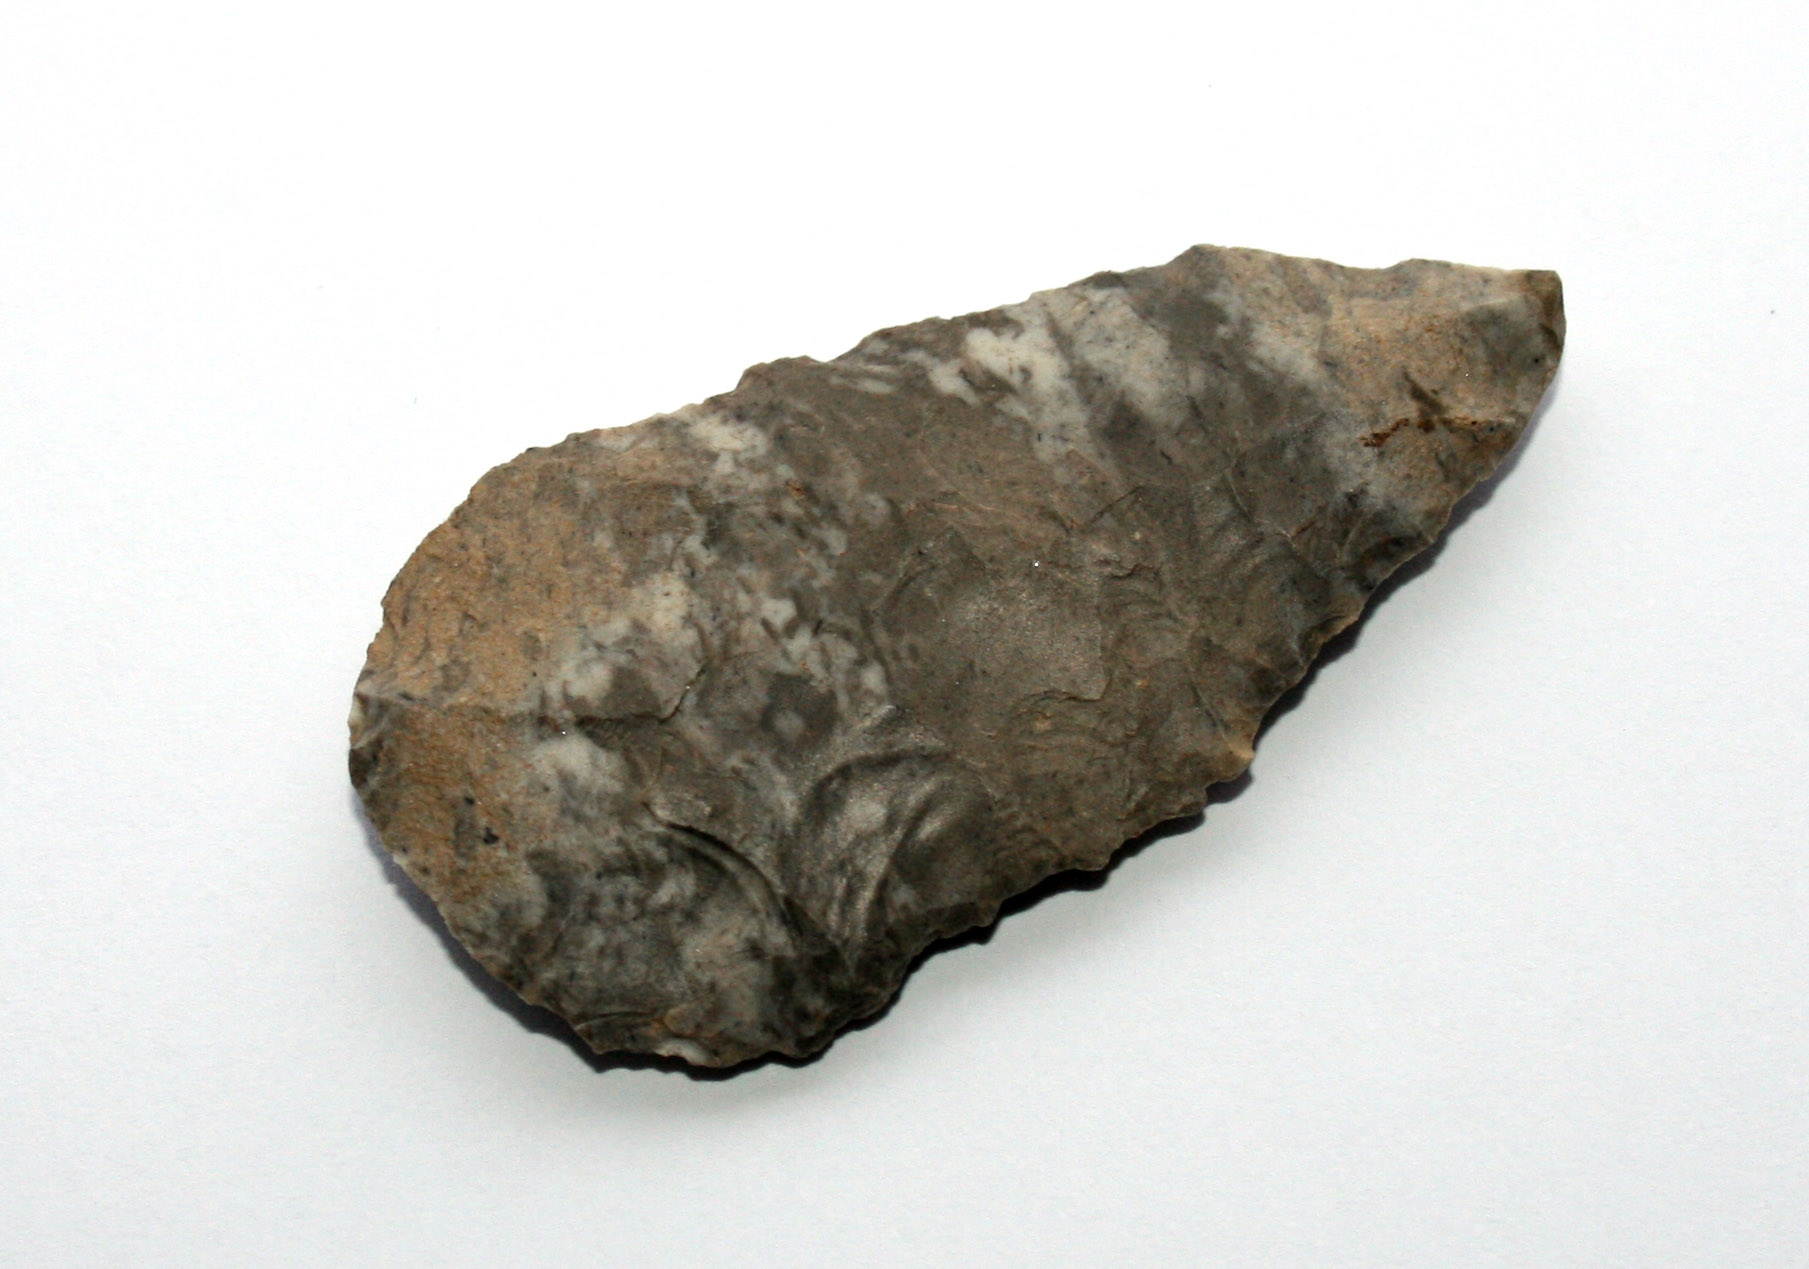 a large rock on white background on display